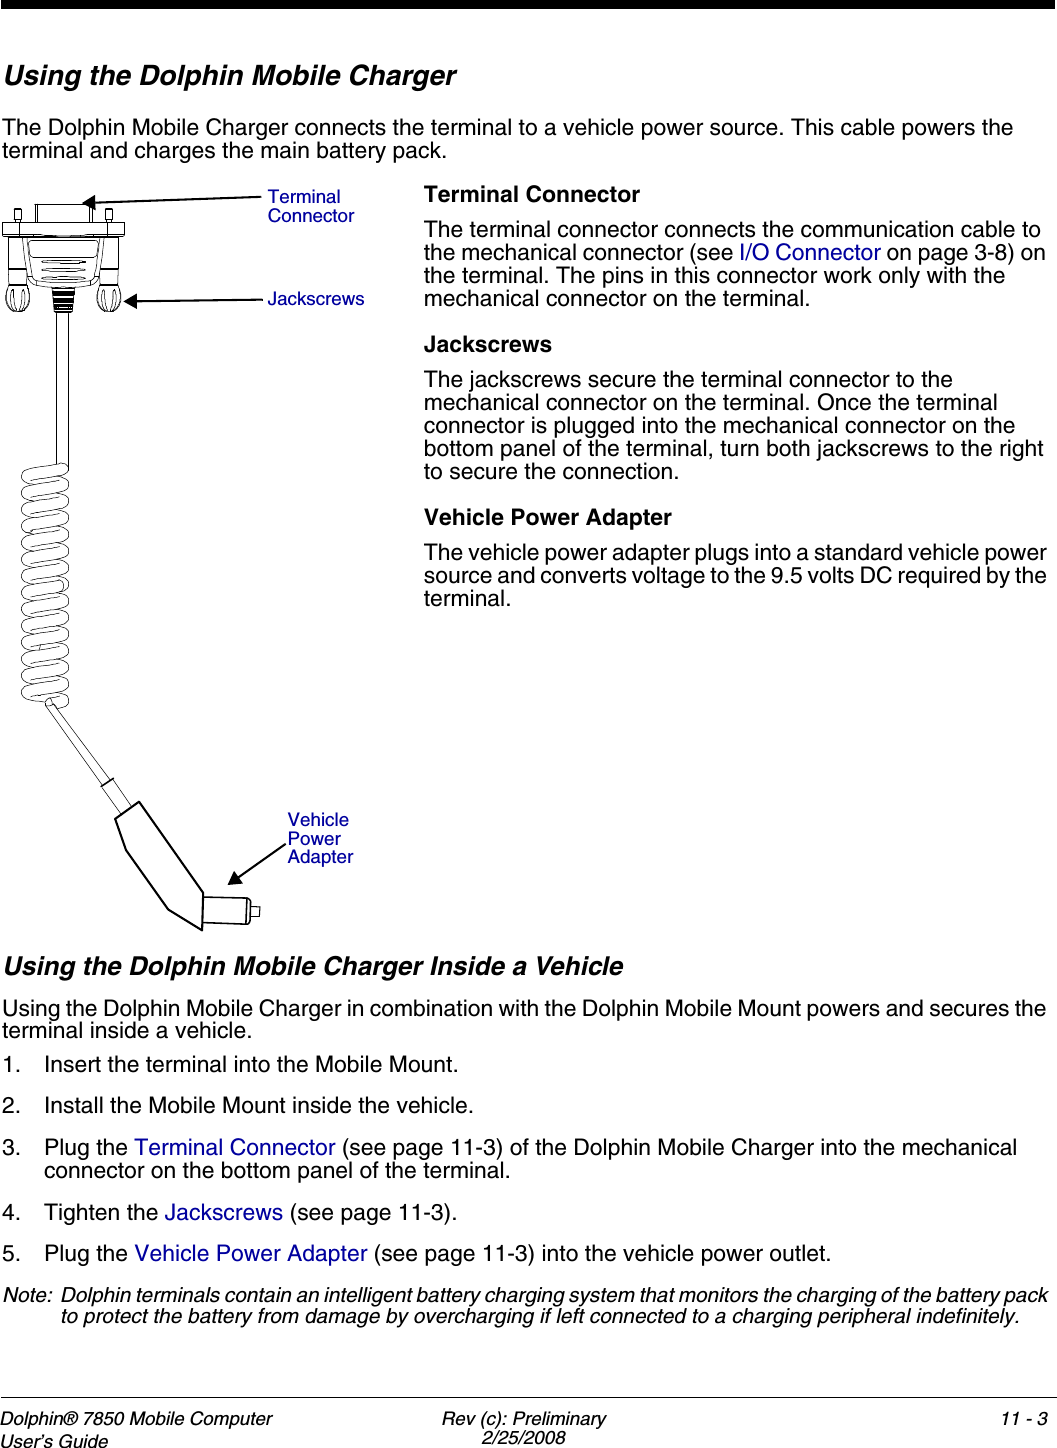 Dolphin® 7850 Mobile Computer  User’s Guide Rev (c): Preliminary2/25/200811 - 3Using the Dolphin Mobile ChargerThe Dolphin Mobile Charger connects the terminal to a vehicle power source. This cable powers the terminal and charges the main battery pack.Terminal ConnectorThe terminal connector connects the communication cable to the mechanical connector (see I/O Connector on page 3-8) on the terminal. The pins in this connector work only with the mechanical connector on the terminal.JackscrewsThe jackscrews secure the terminal connector to the mechanical connector on the terminal. Once the terminal connector is plugged into the mechanical connector on the bottom panel of the terminal, turn both jackscrews to the right to secure the connection. Vehicle Power AdapterThe vehicle power adapter plugs into a standard vehicle power source and converts voltage to the 9.5 volts DC required by the terminal.Using the Dolphin Mobile Charger Inside a VehicleUsing the Dolphin Mobile Charger in combination with the Dolphin Mobile Mount powers and secures the terminal inside a vehicle. 1. Insert the terminal into the Mobile Mount.2. Install the Mobile Mount inside the vehicle.3. Plug the Terminal Connector (see page 11-3) of the Dolphin Mobile Charger into the mechanical connector on the bottom panel of the terminal.4. Tighten the Jackscrews (see page 11-3).5. Plug the Vehicle Power Adapter (see page 11-3) into the vehicle power outlet.Note: Dolphin terminals contain an intelligent battery charging system that monitors the charging of the battery pack to protect the battery from damage by overcharging if left connected to a charging peripheral indefinitely. Terminal ConnectorJackscrewsVehicle Power Adapter